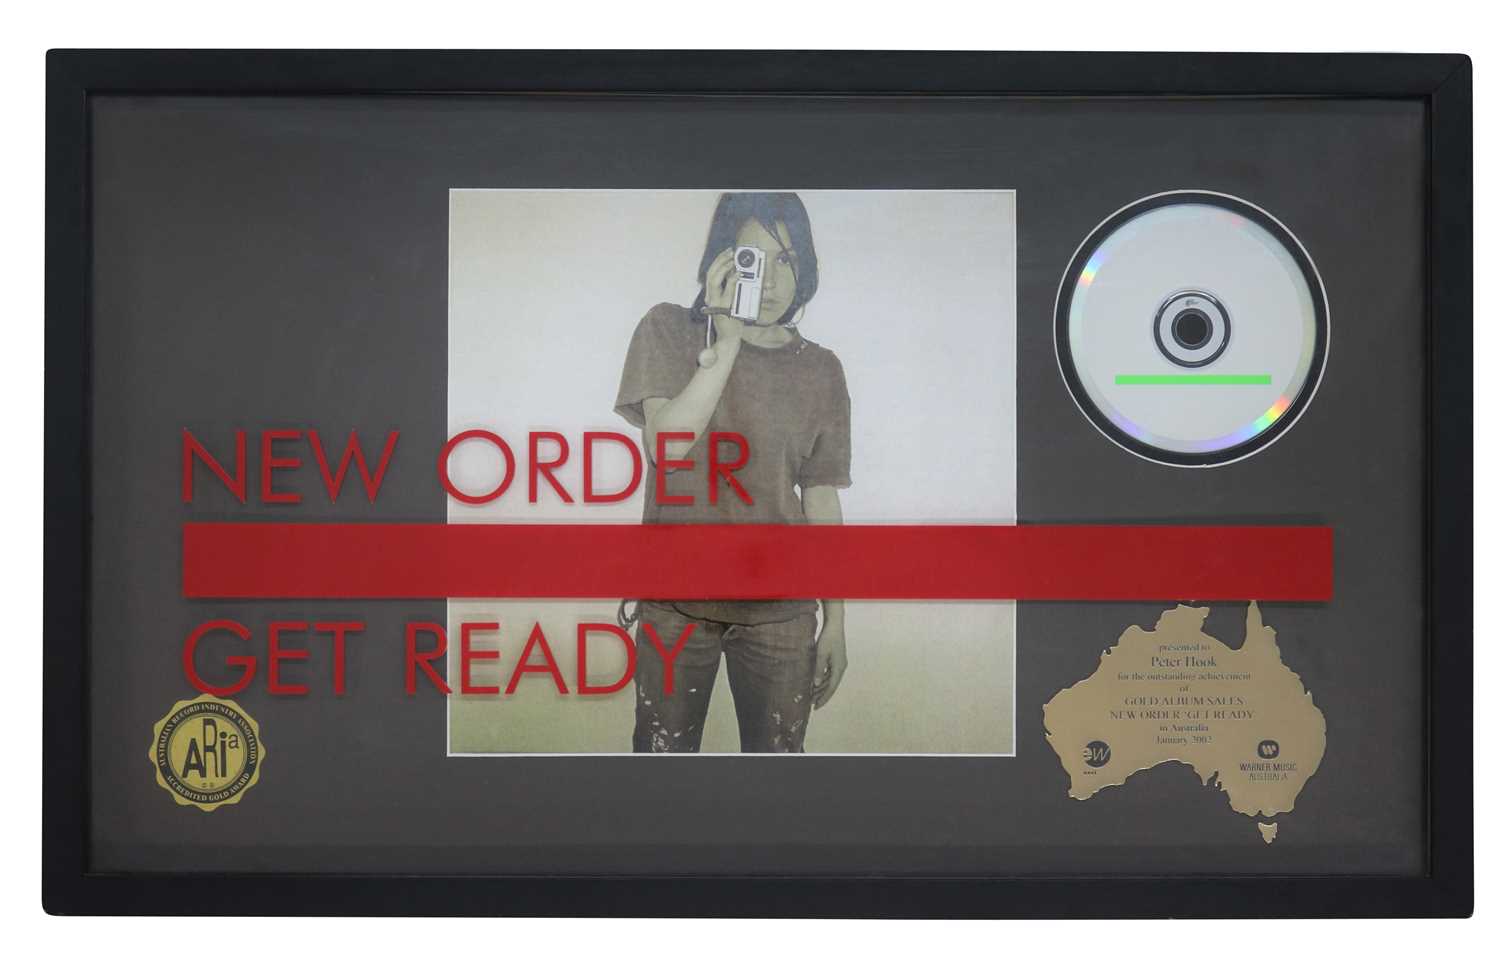 Lot 41 - NEW ORDER RIAA GOLD AWARD FOR GET READY